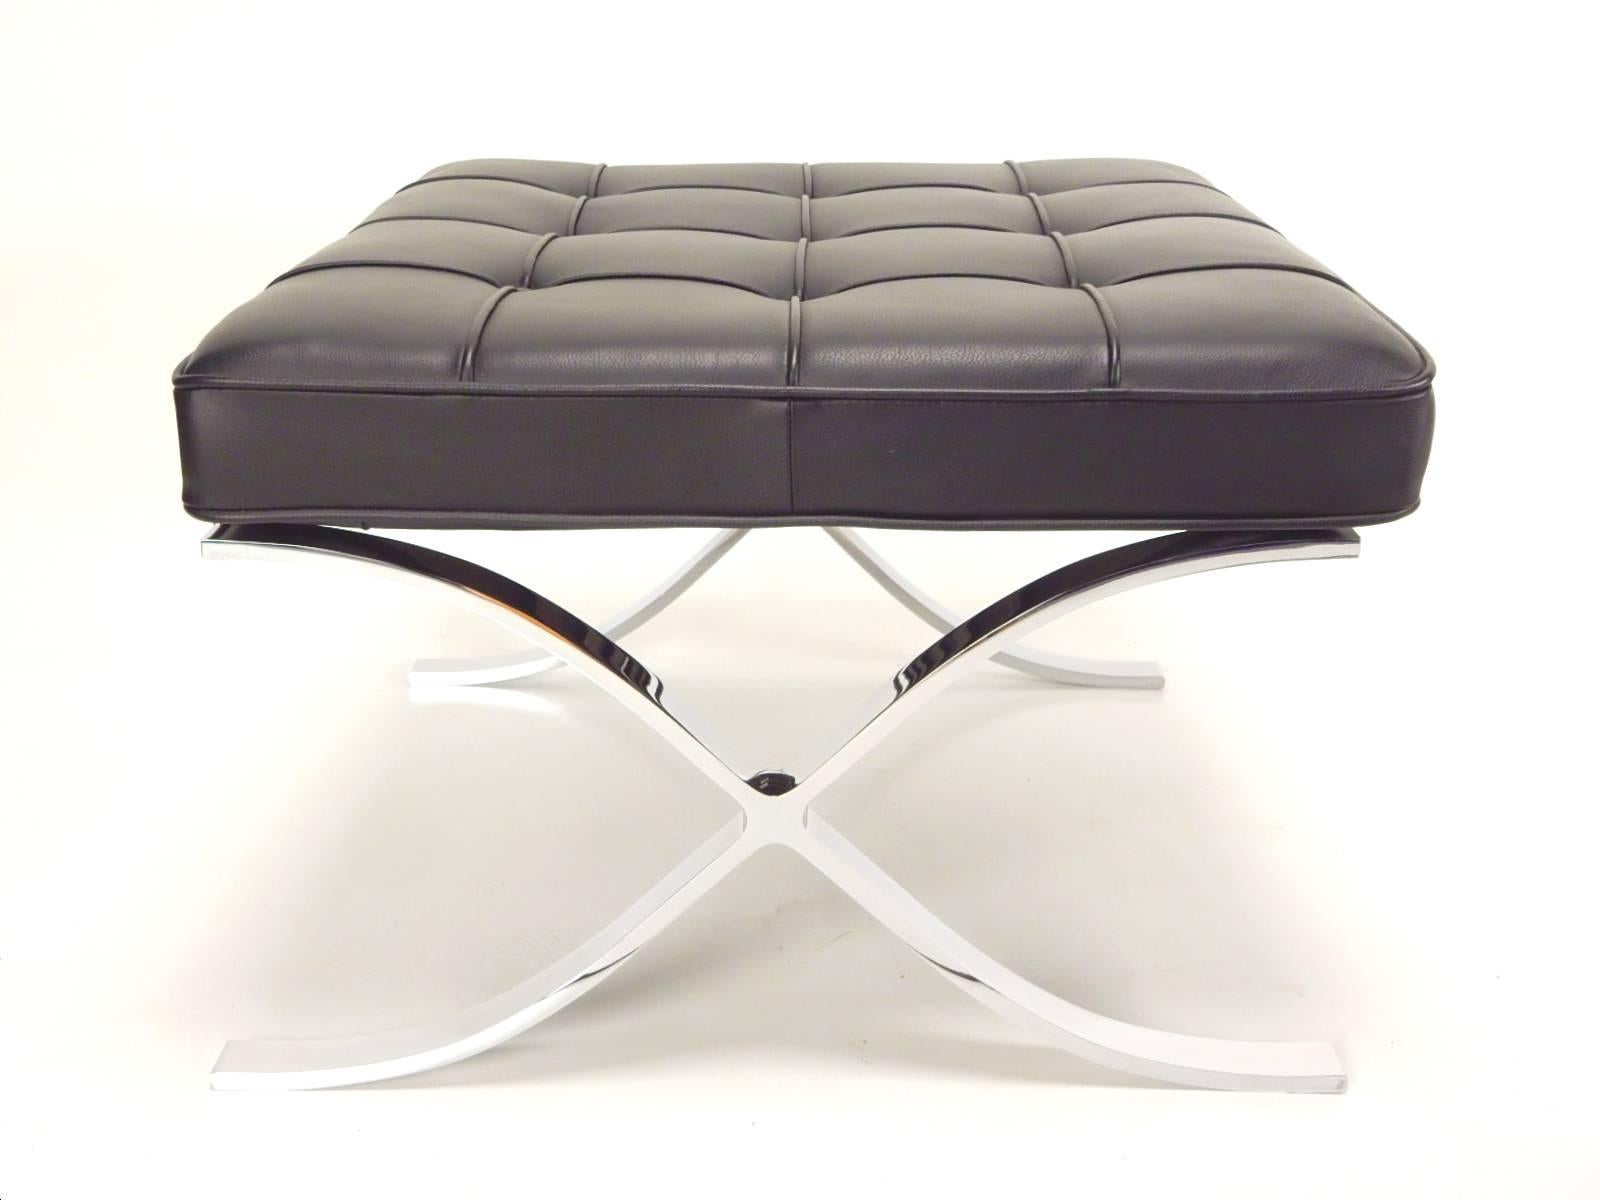 Barcelona Chair Ottomas by Ludwig Mies van der Rohe for Knoll 1